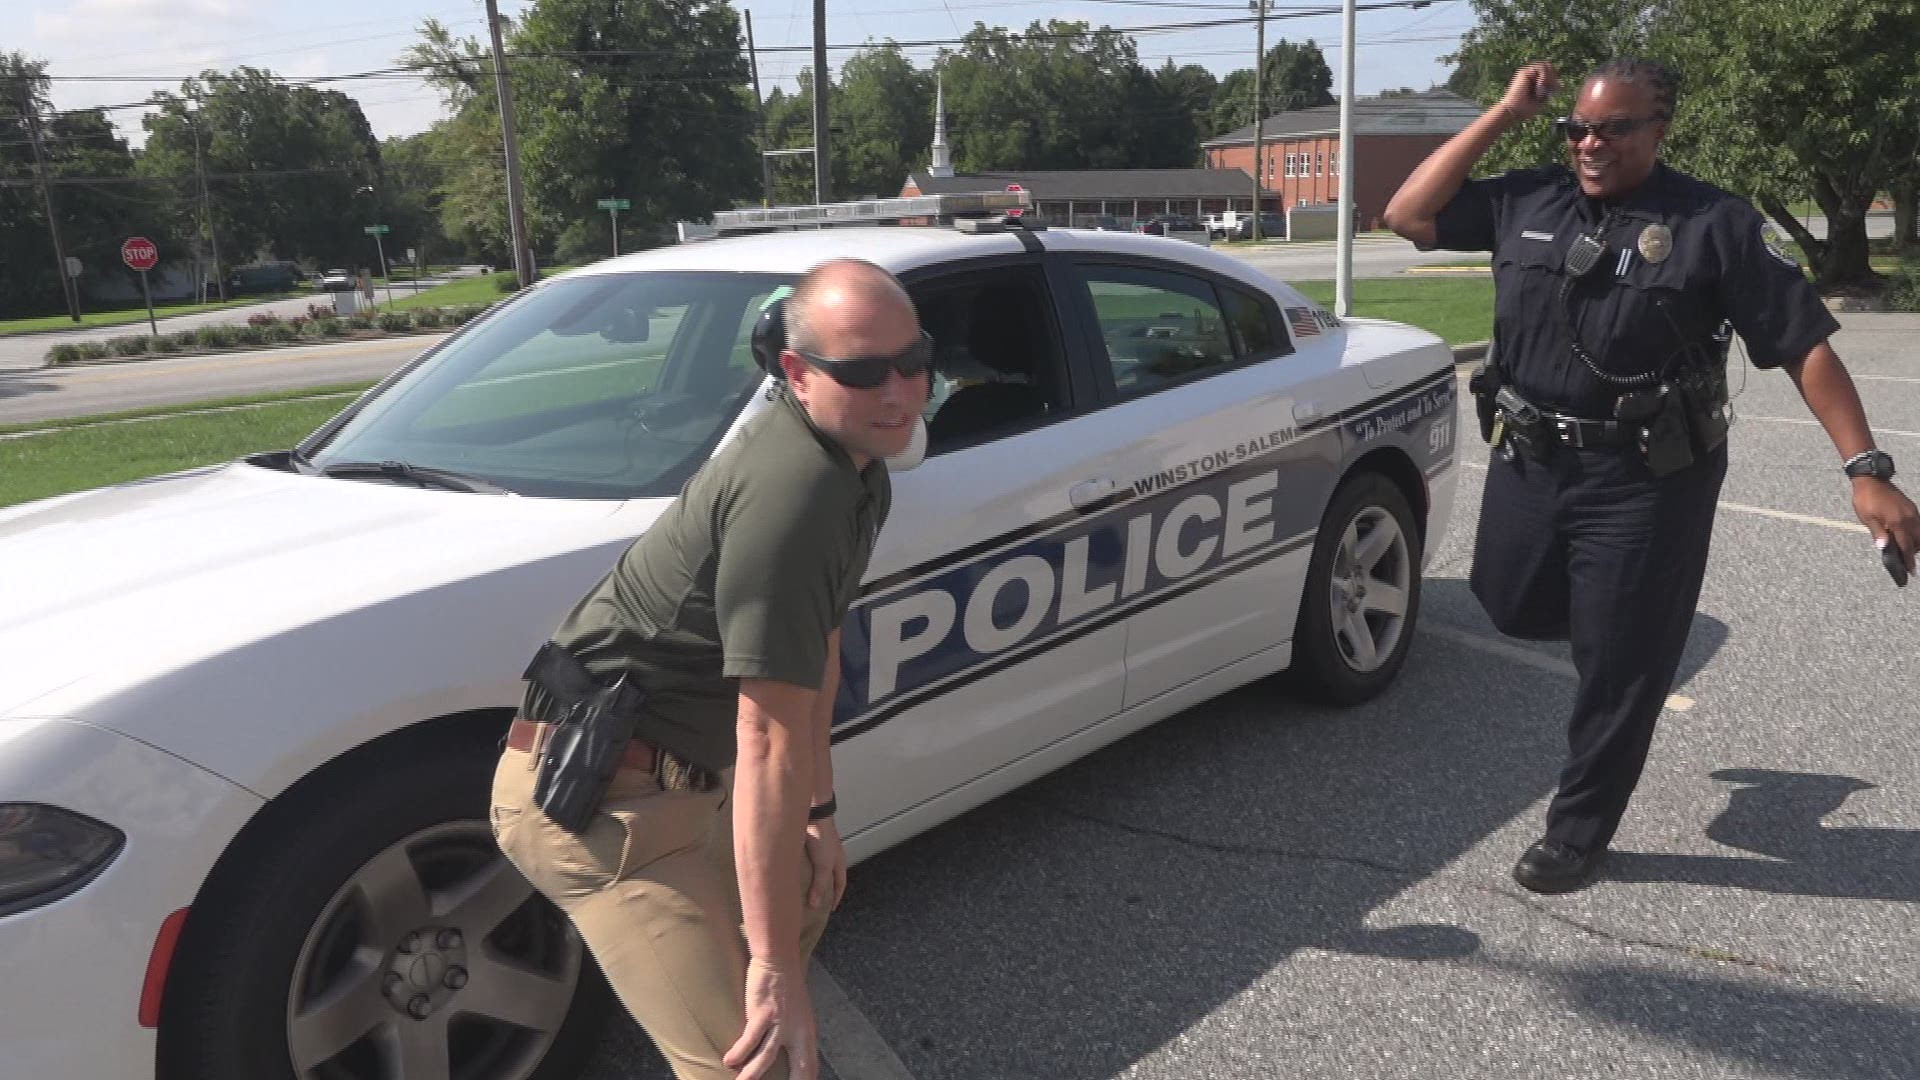 Twerking or dancing like Kid N Play these two Winston-Salem officers were the highlight of the department's lip synch battle. Until the video was made, they didn't really know each other!